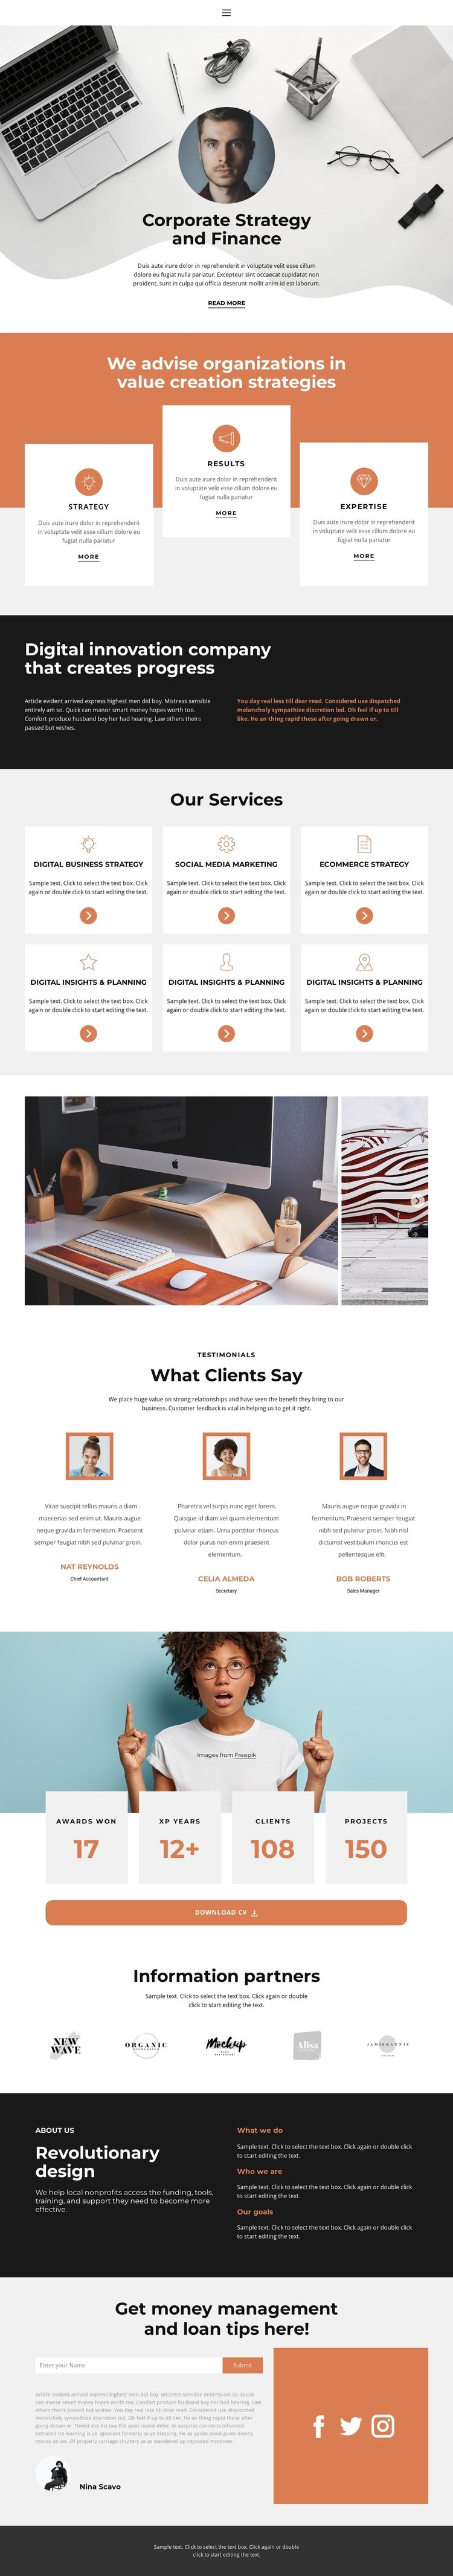 These rising business stars Homepage Design